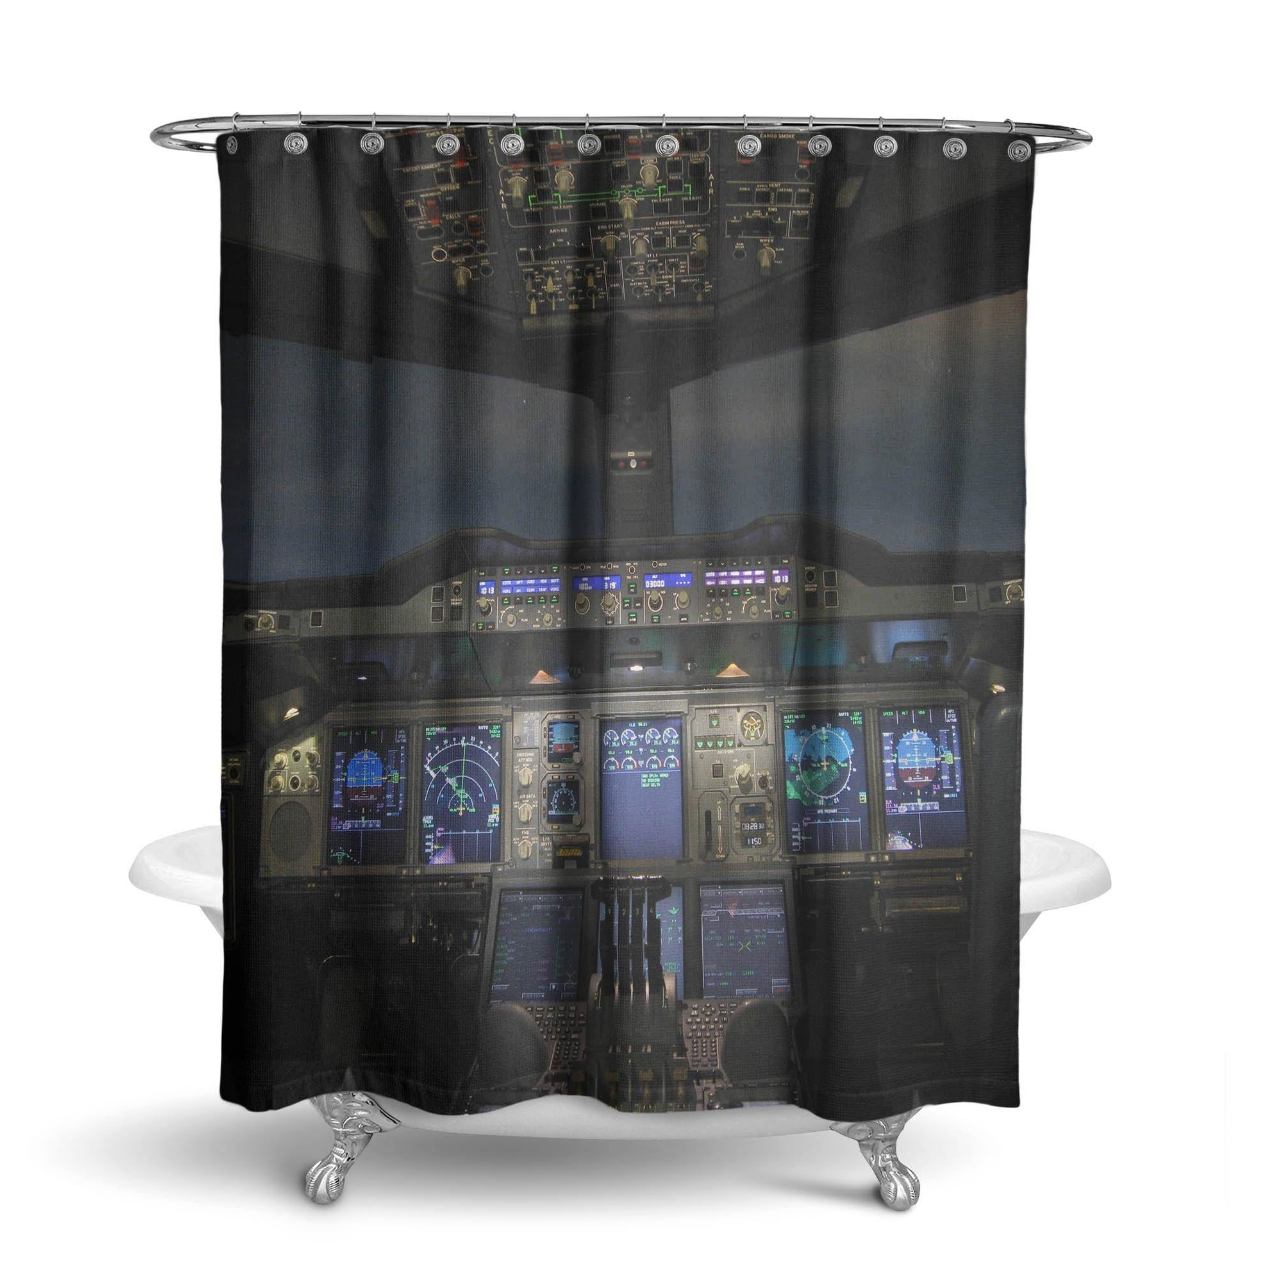 Airbus A380 Cockpit Printed Shower Curtains